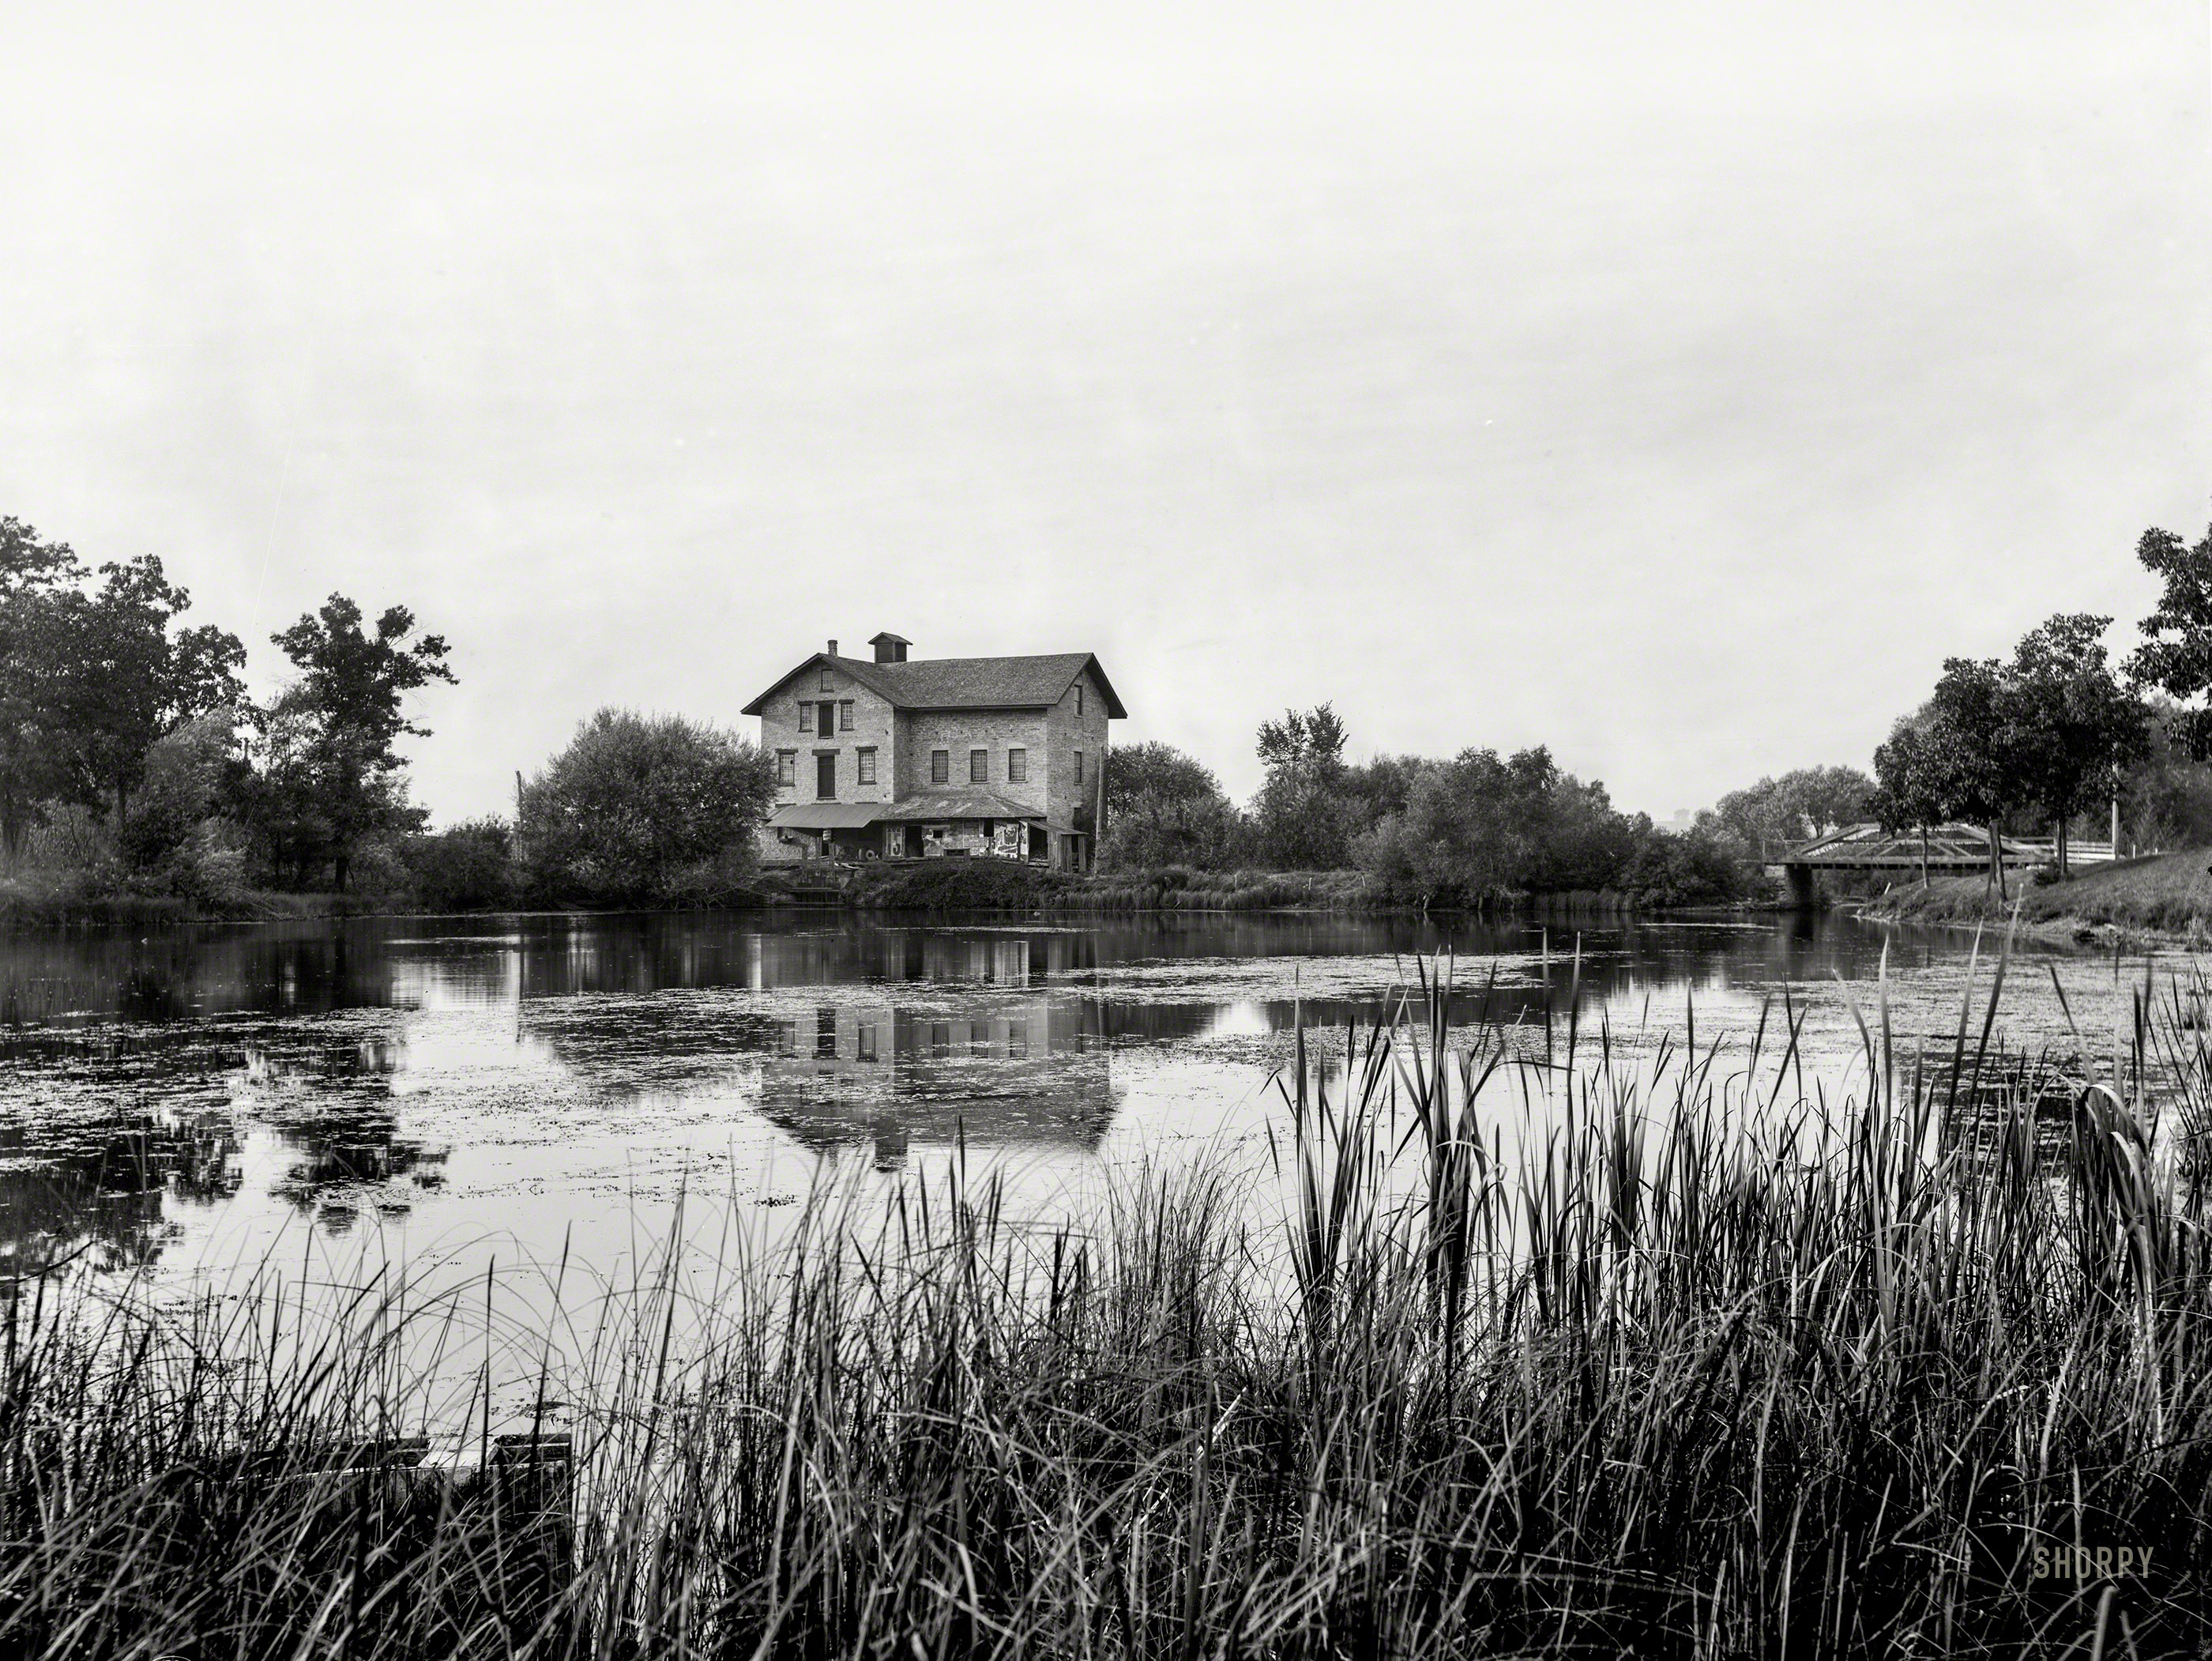 Green Lake, Wisconsin, circa 1899. "Old mill at railway station." 8x10 inch dry plate glass negative, Detroit Publishing Company. View full size.